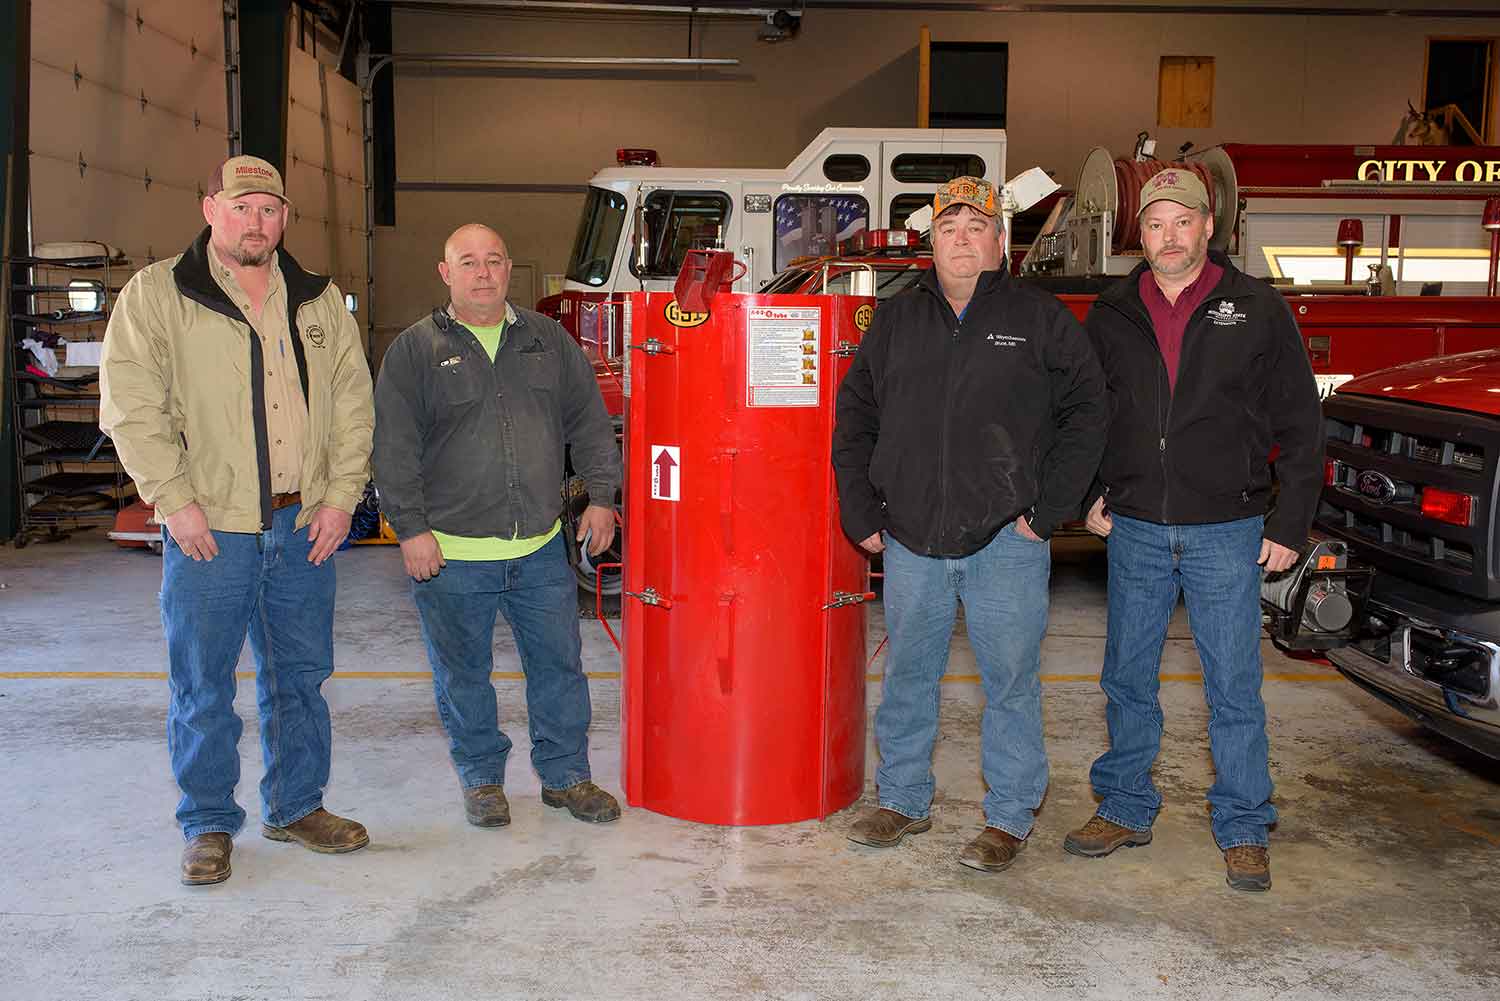 Four men stand in front of a red firetruck.